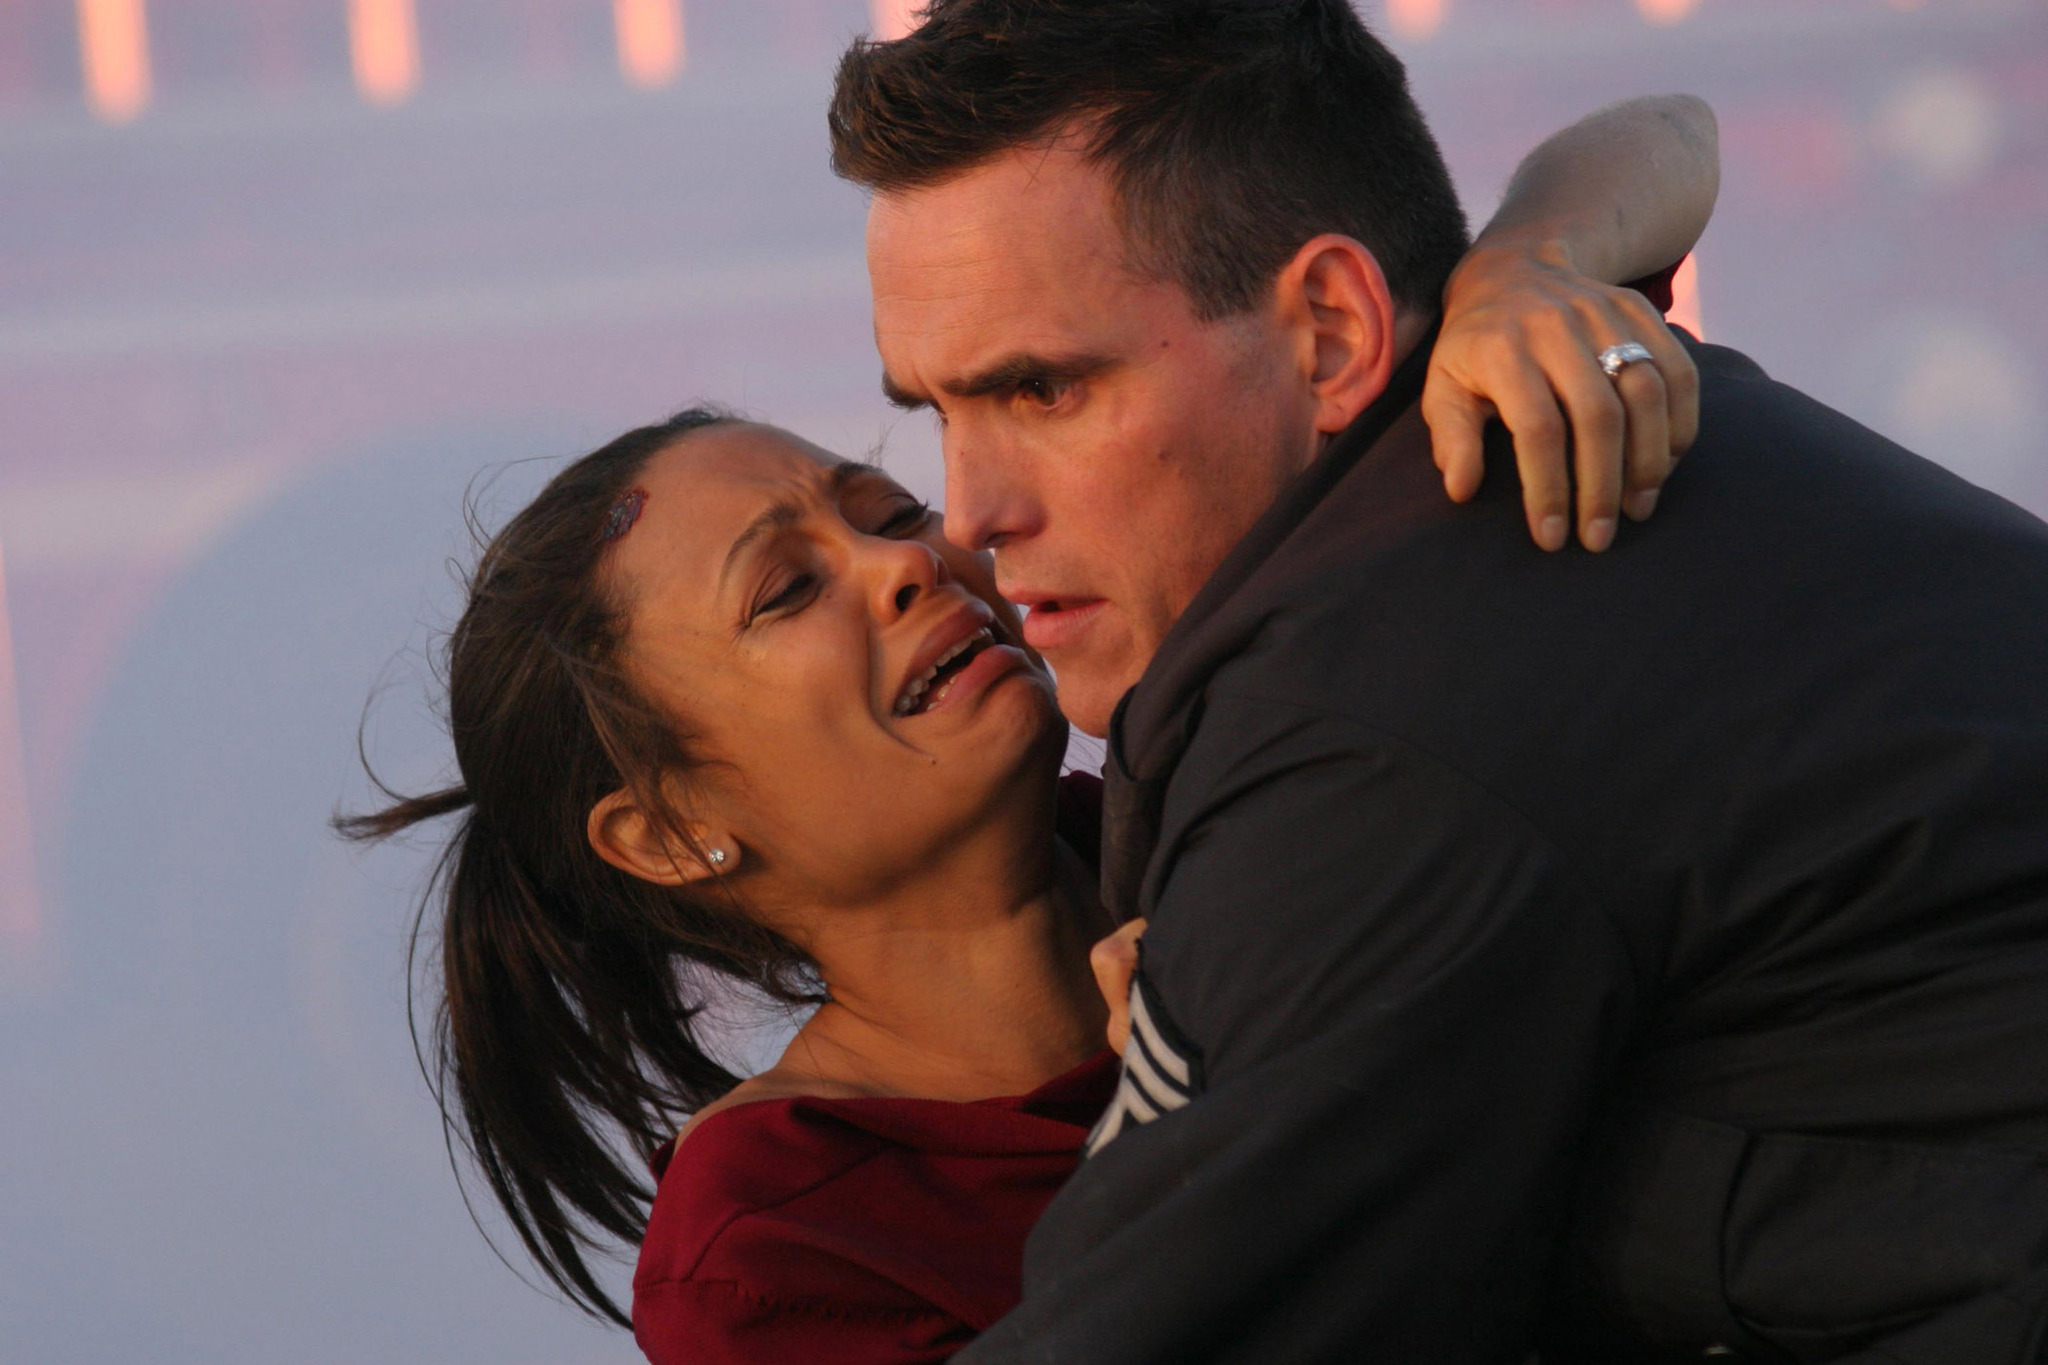 Two actors portraying intense emotion, the woman appears distraught and the man looks concerned, in a close embrace